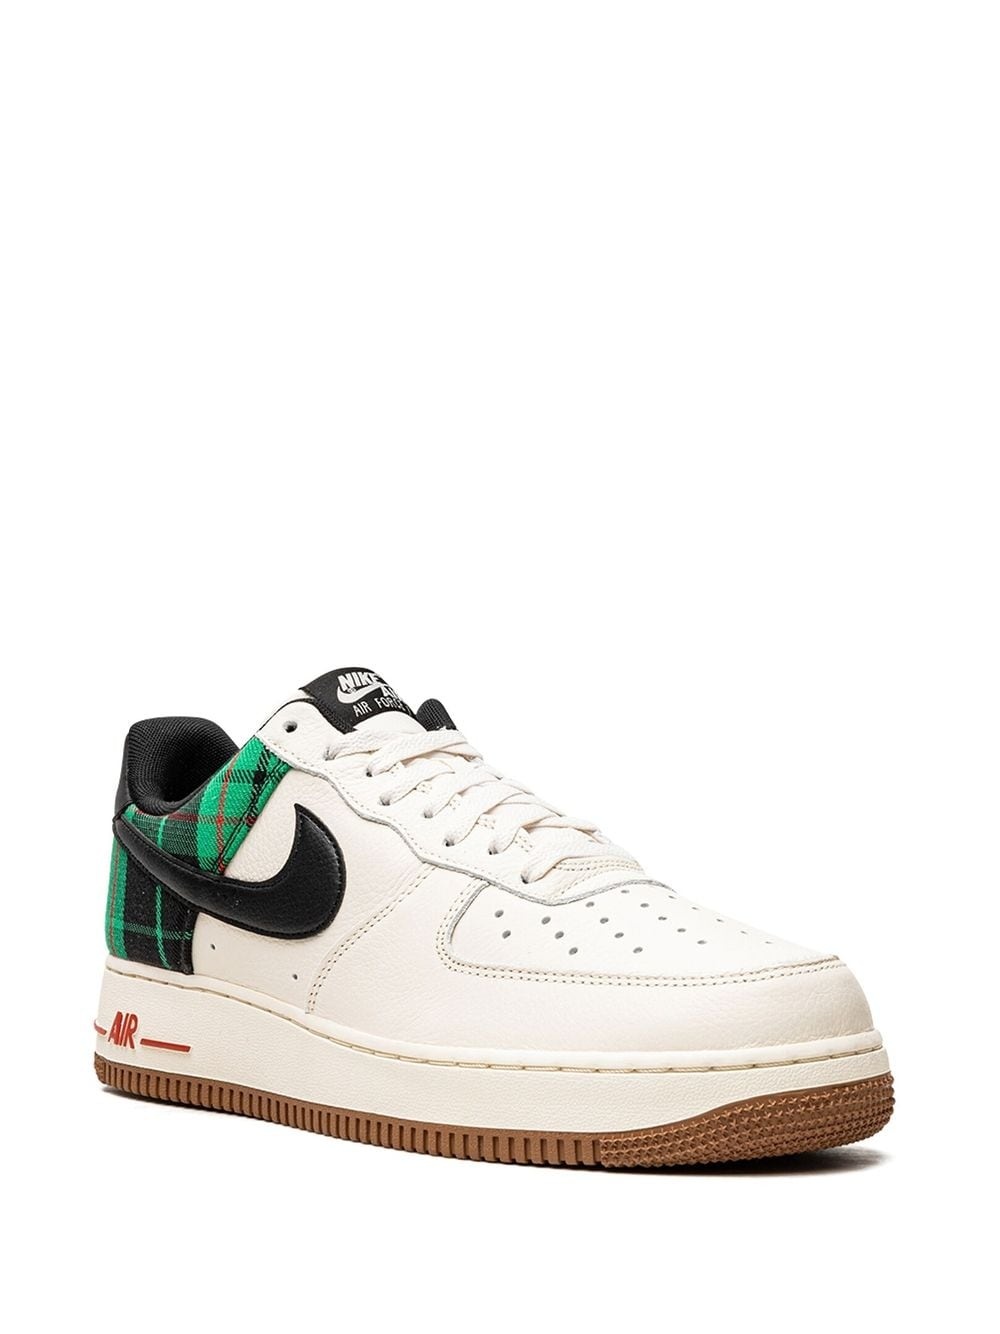 Air Force 1 Low '07 LX "Plaid Pale Ivory Stadium Green" sneakers - 2